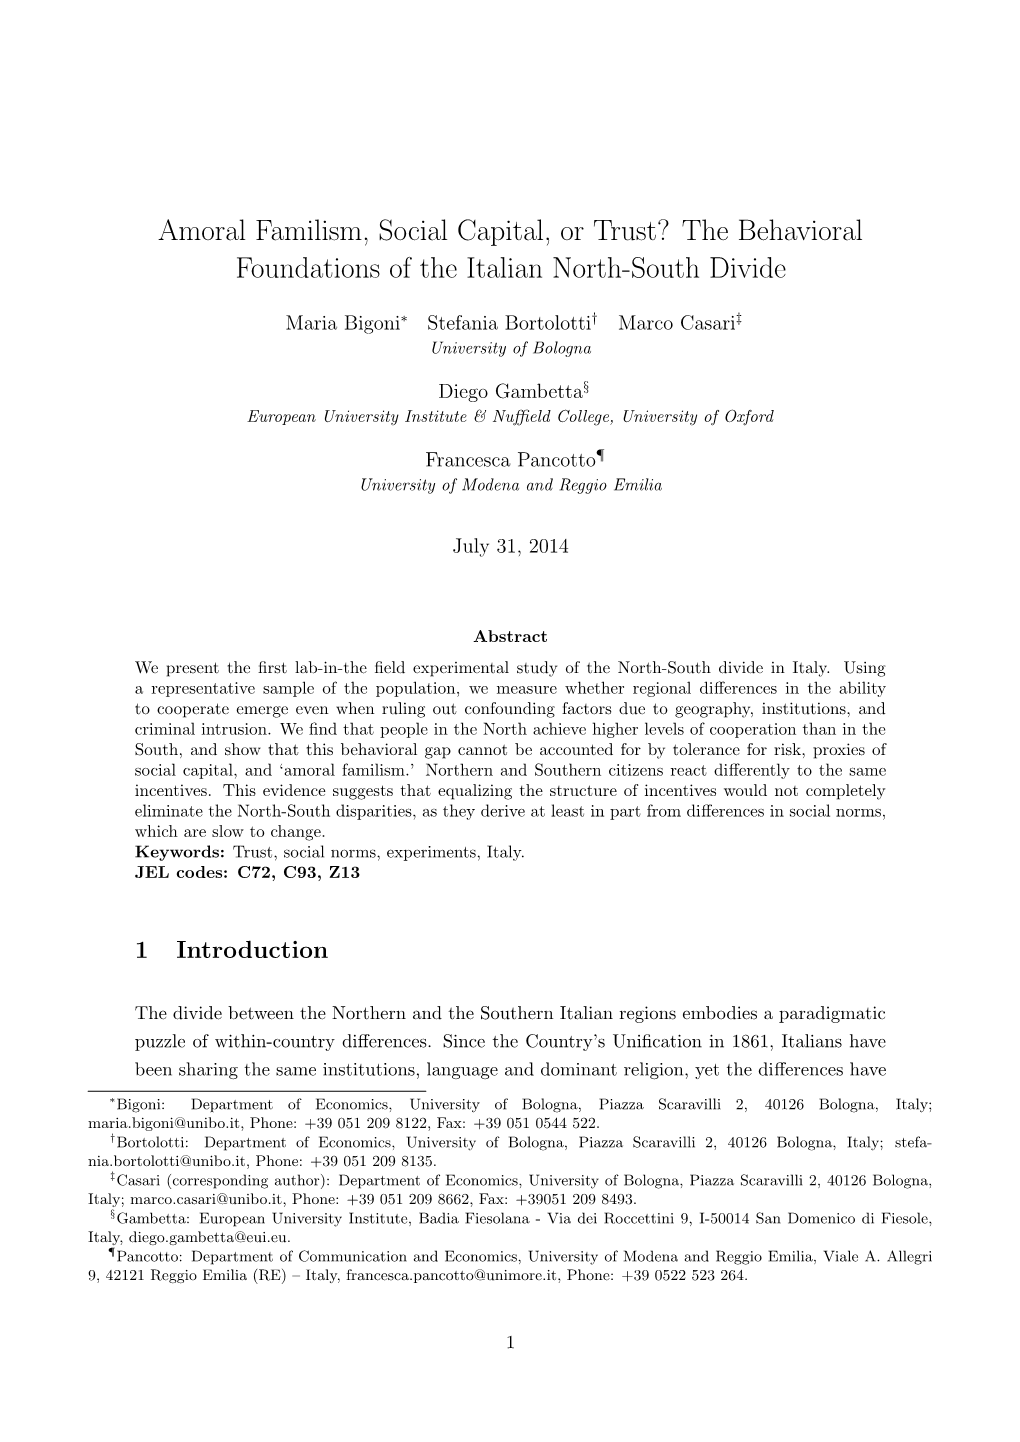 Amoral Familism, Social Capital, Or Trust? the Behavioral Foundations of the Italian North-South Divide